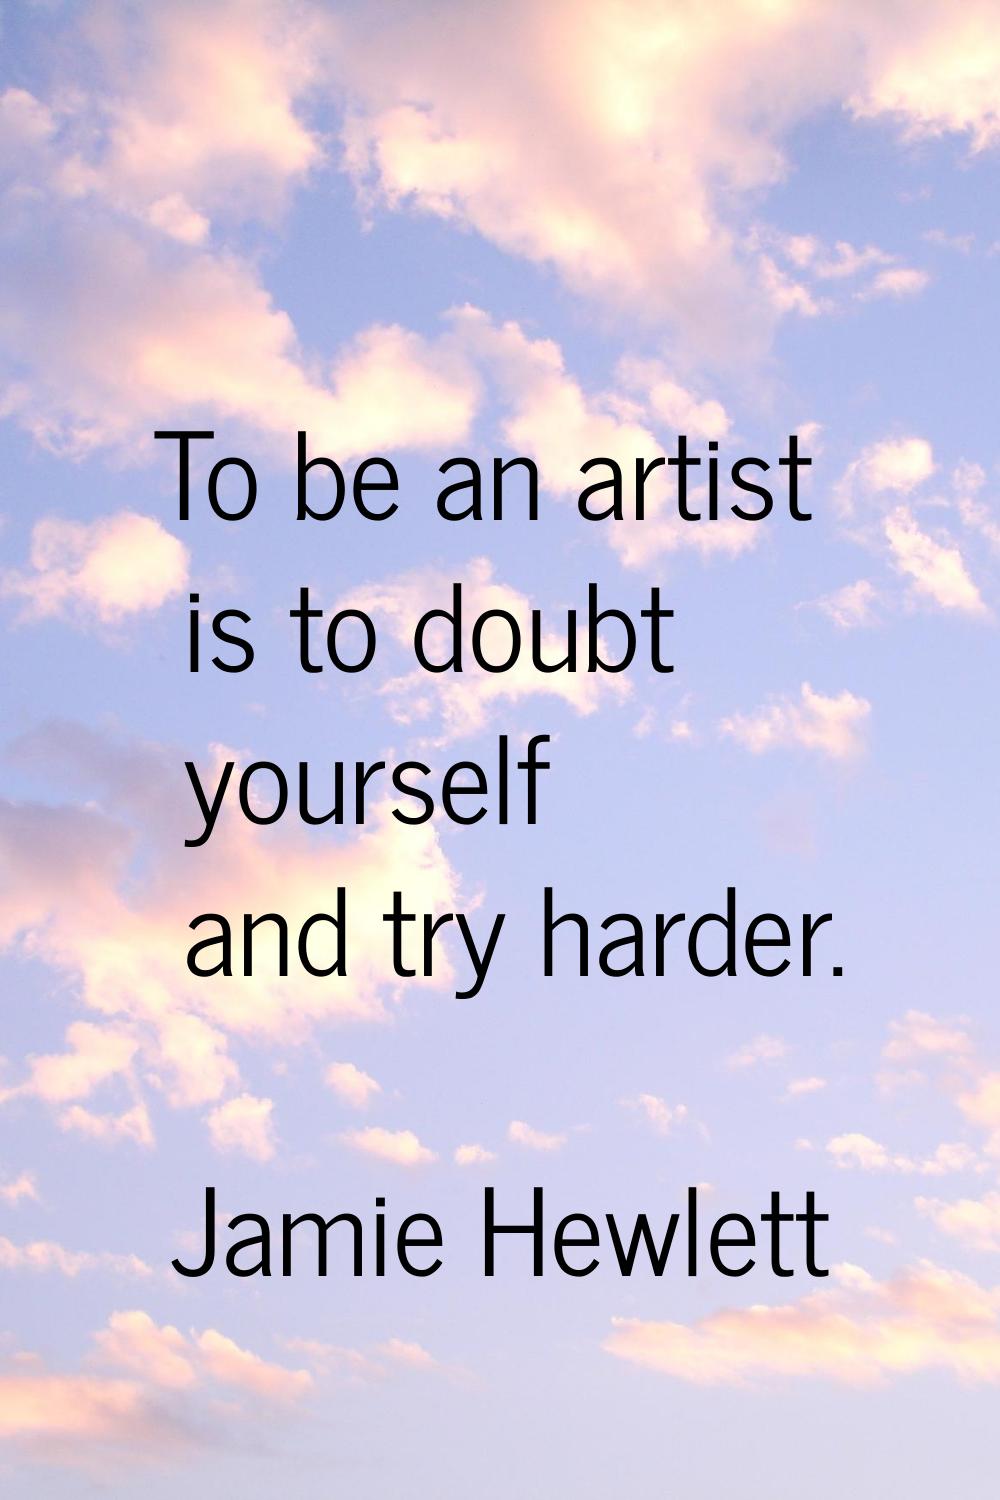 To be an artist is to doubt yourself and try harder.